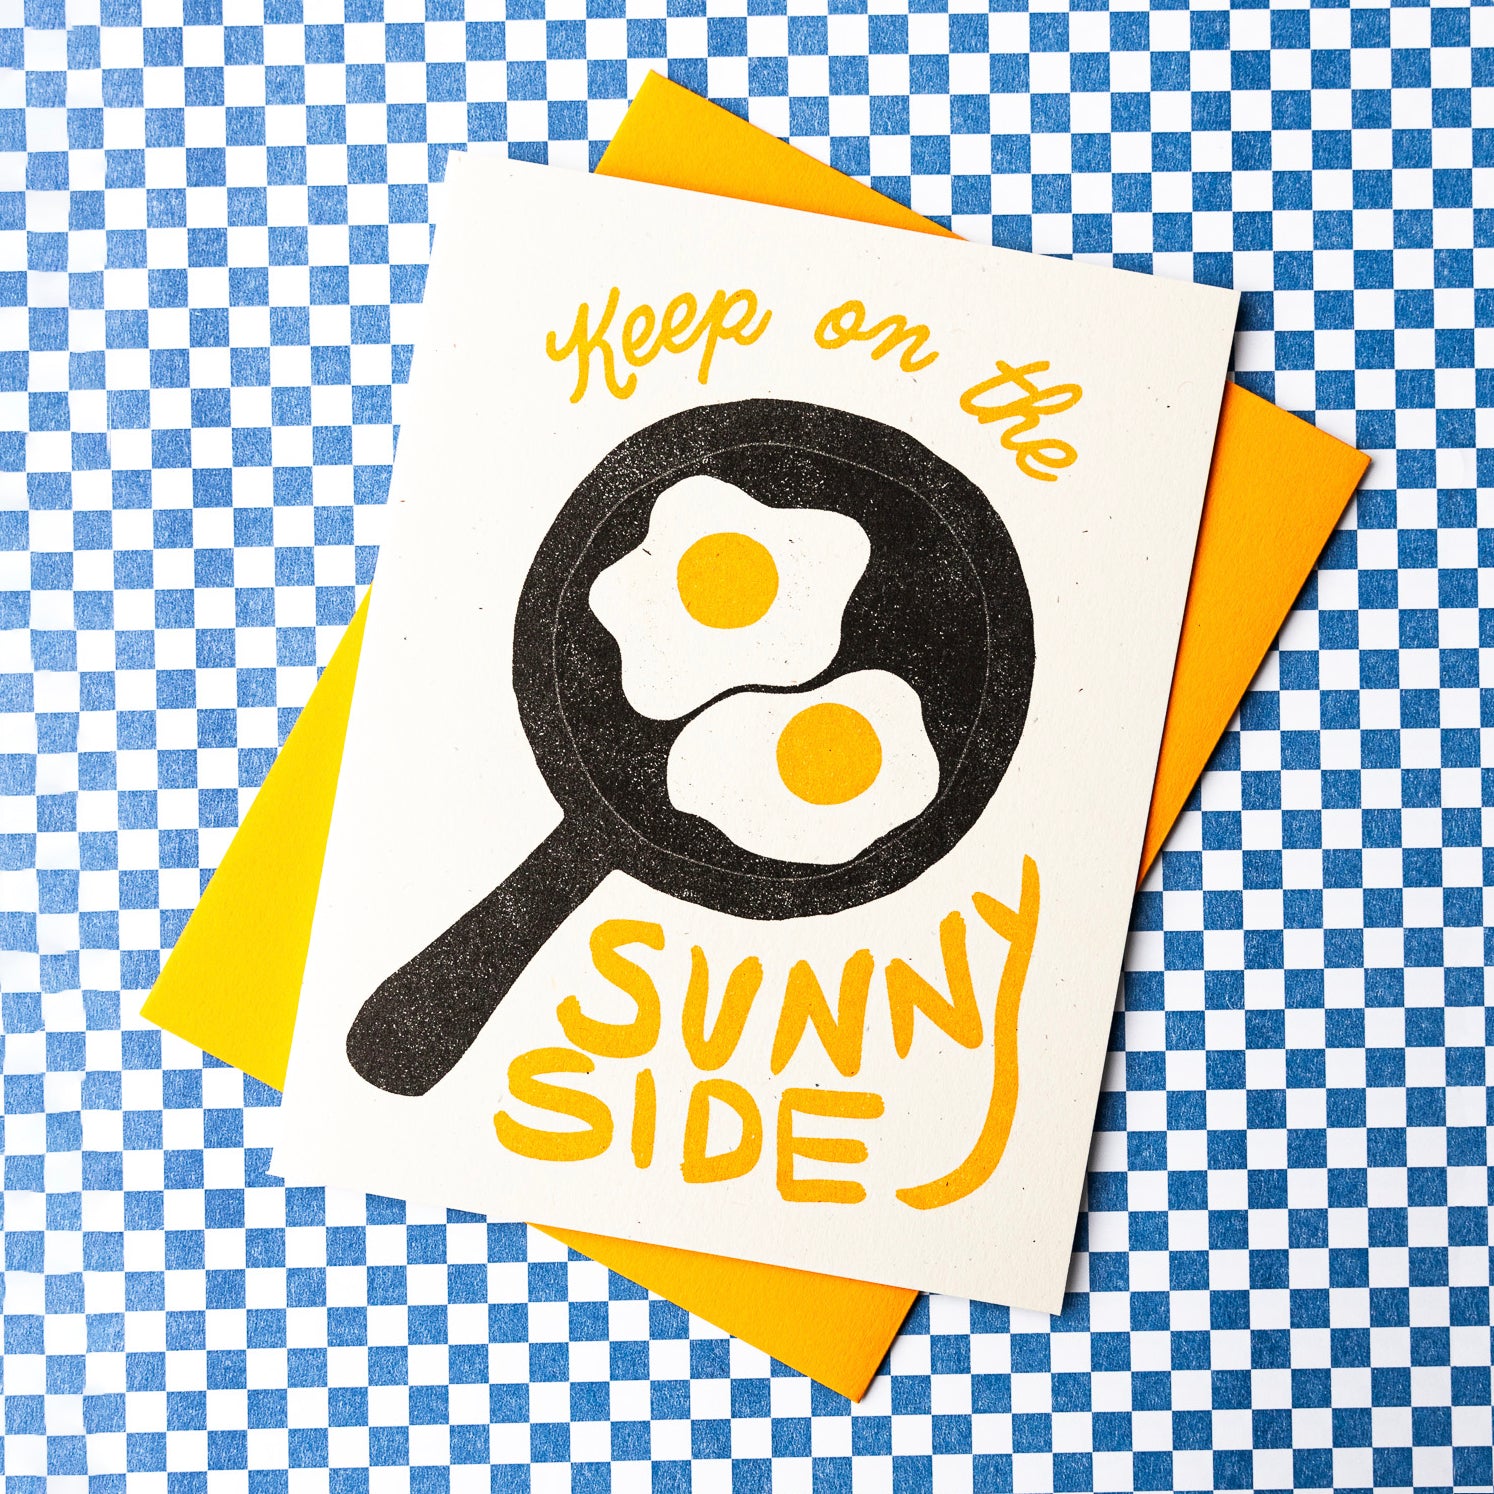 Keep On The Sunny Side - Risograph Greeting Card